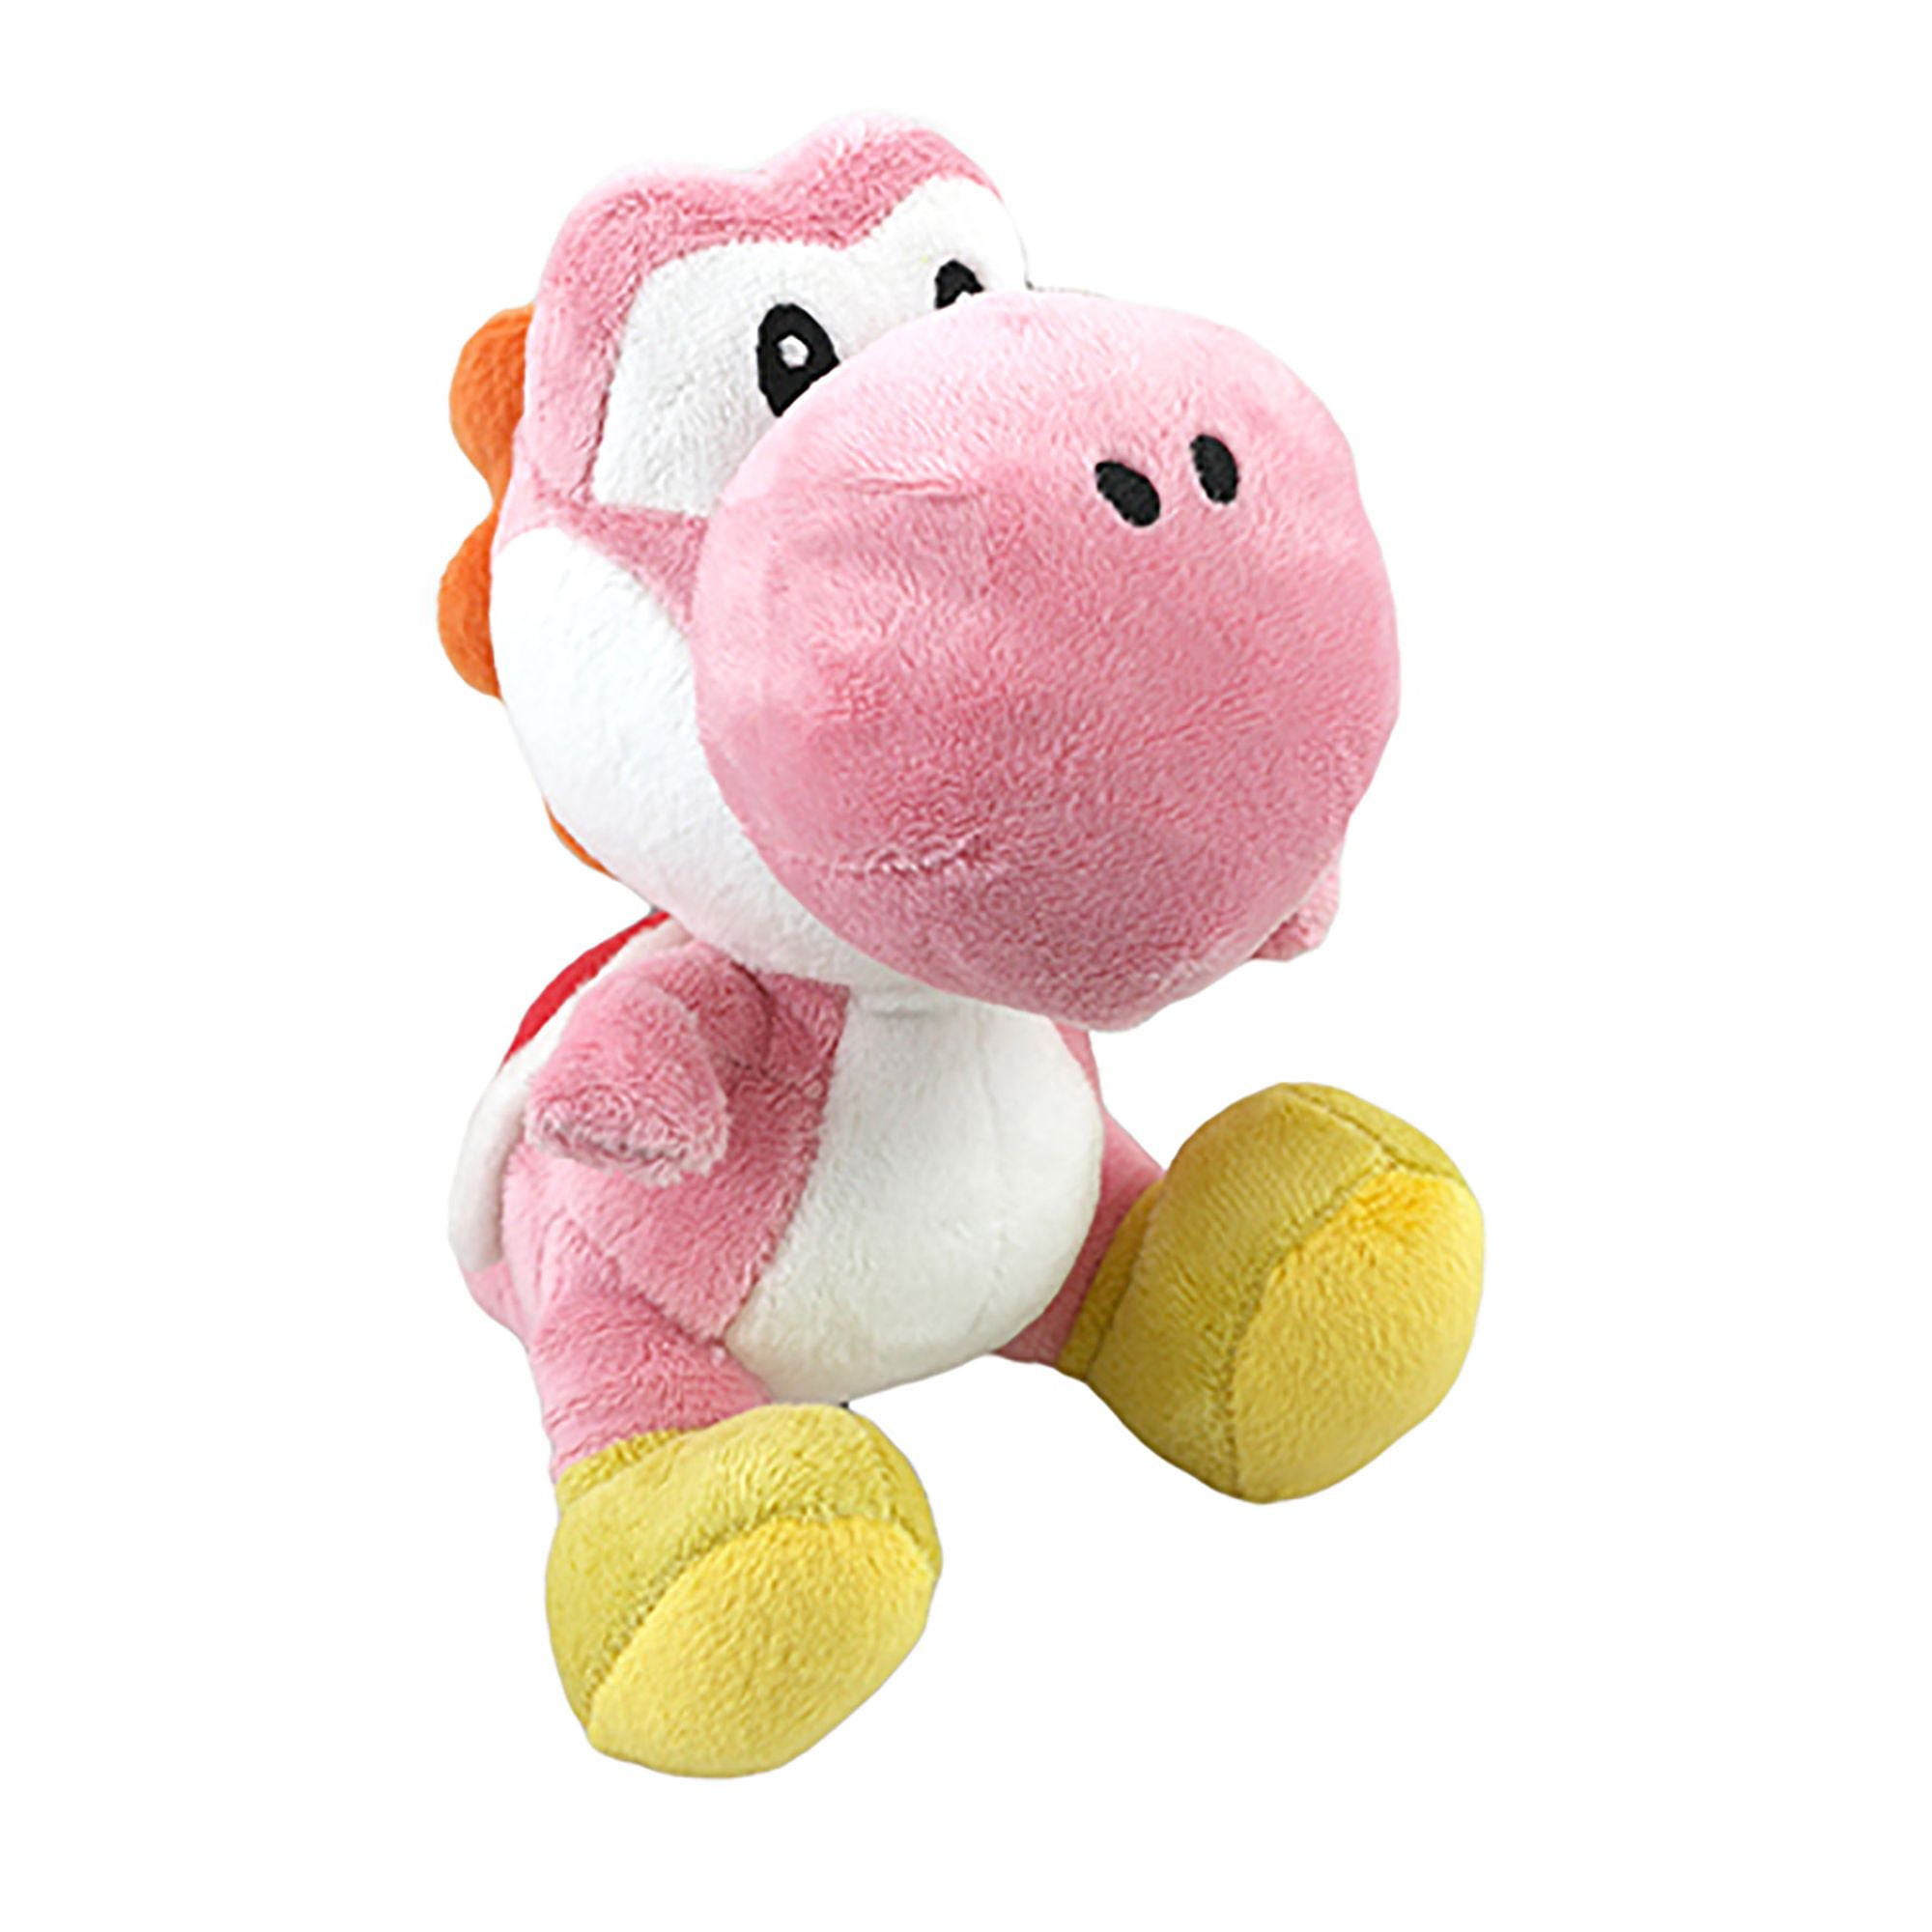 Real Little Buddy 1218 Super Mario All Star Collection 7" Pink Yoshi Plush